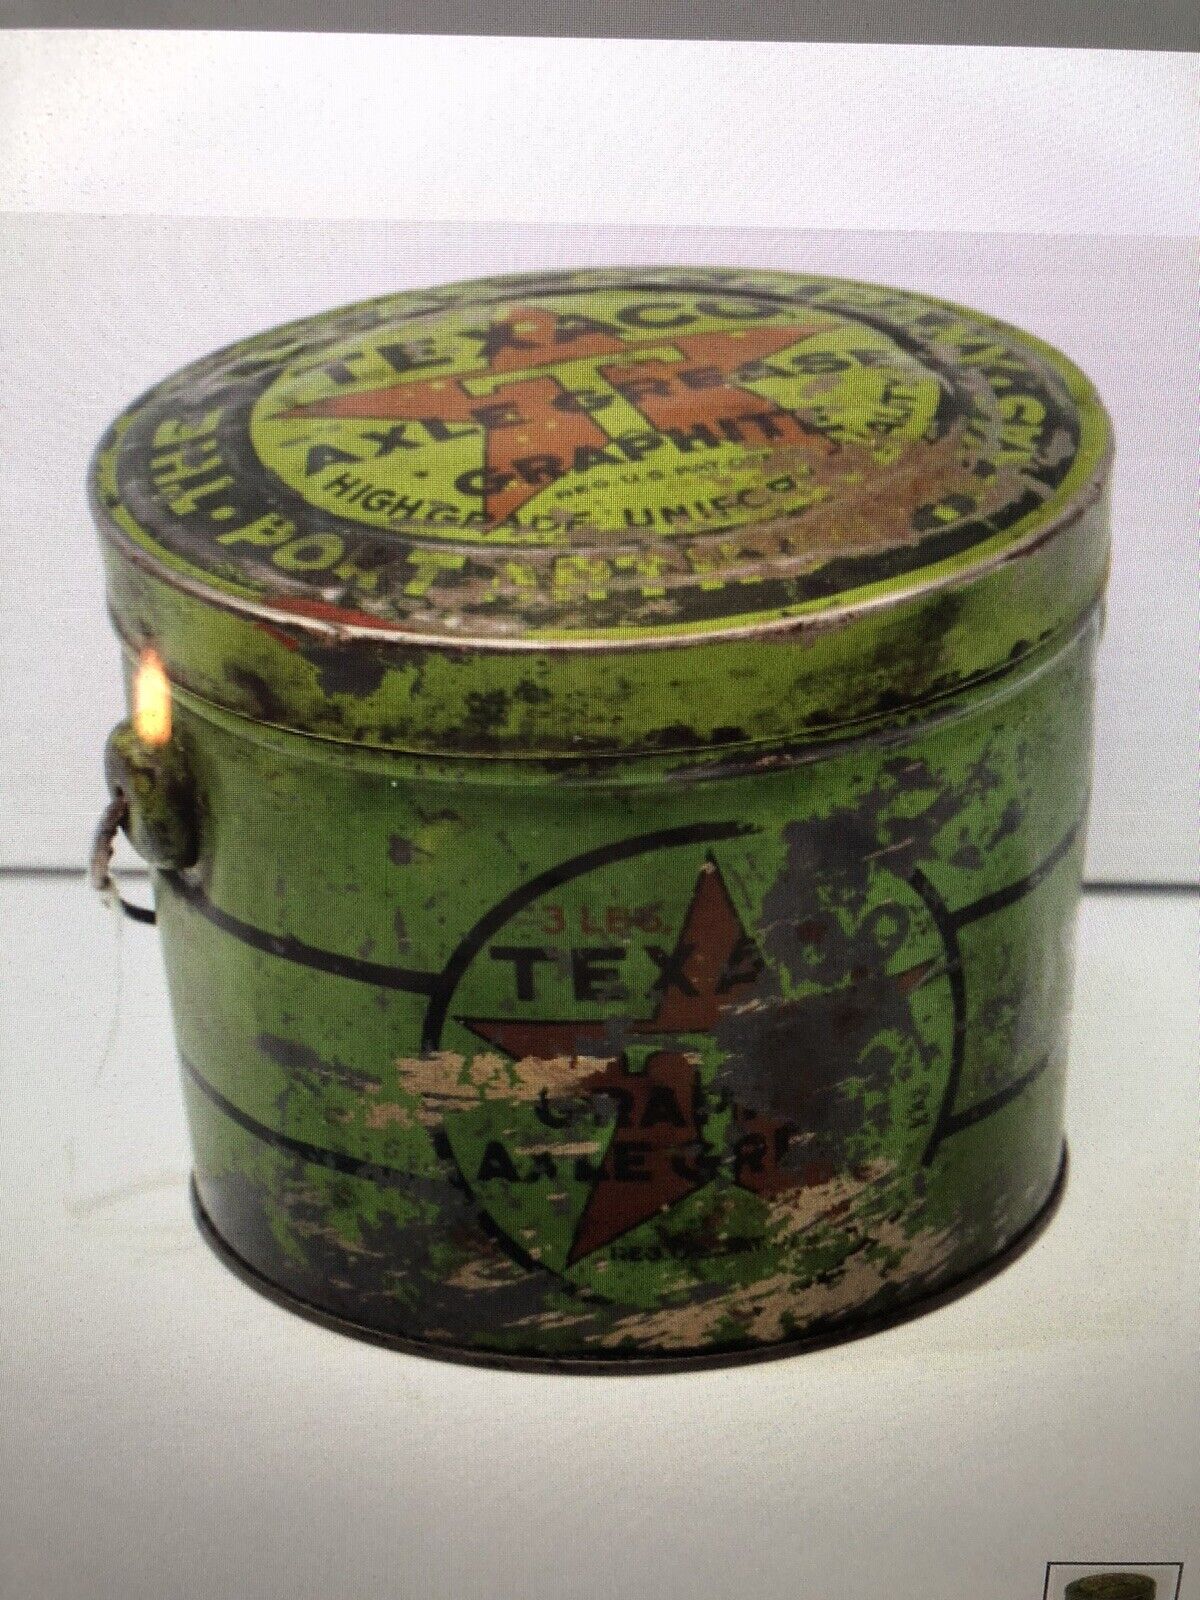 Vintage 3 lb Texaco Graphite Axle Grease Can from Port Arthur TX.